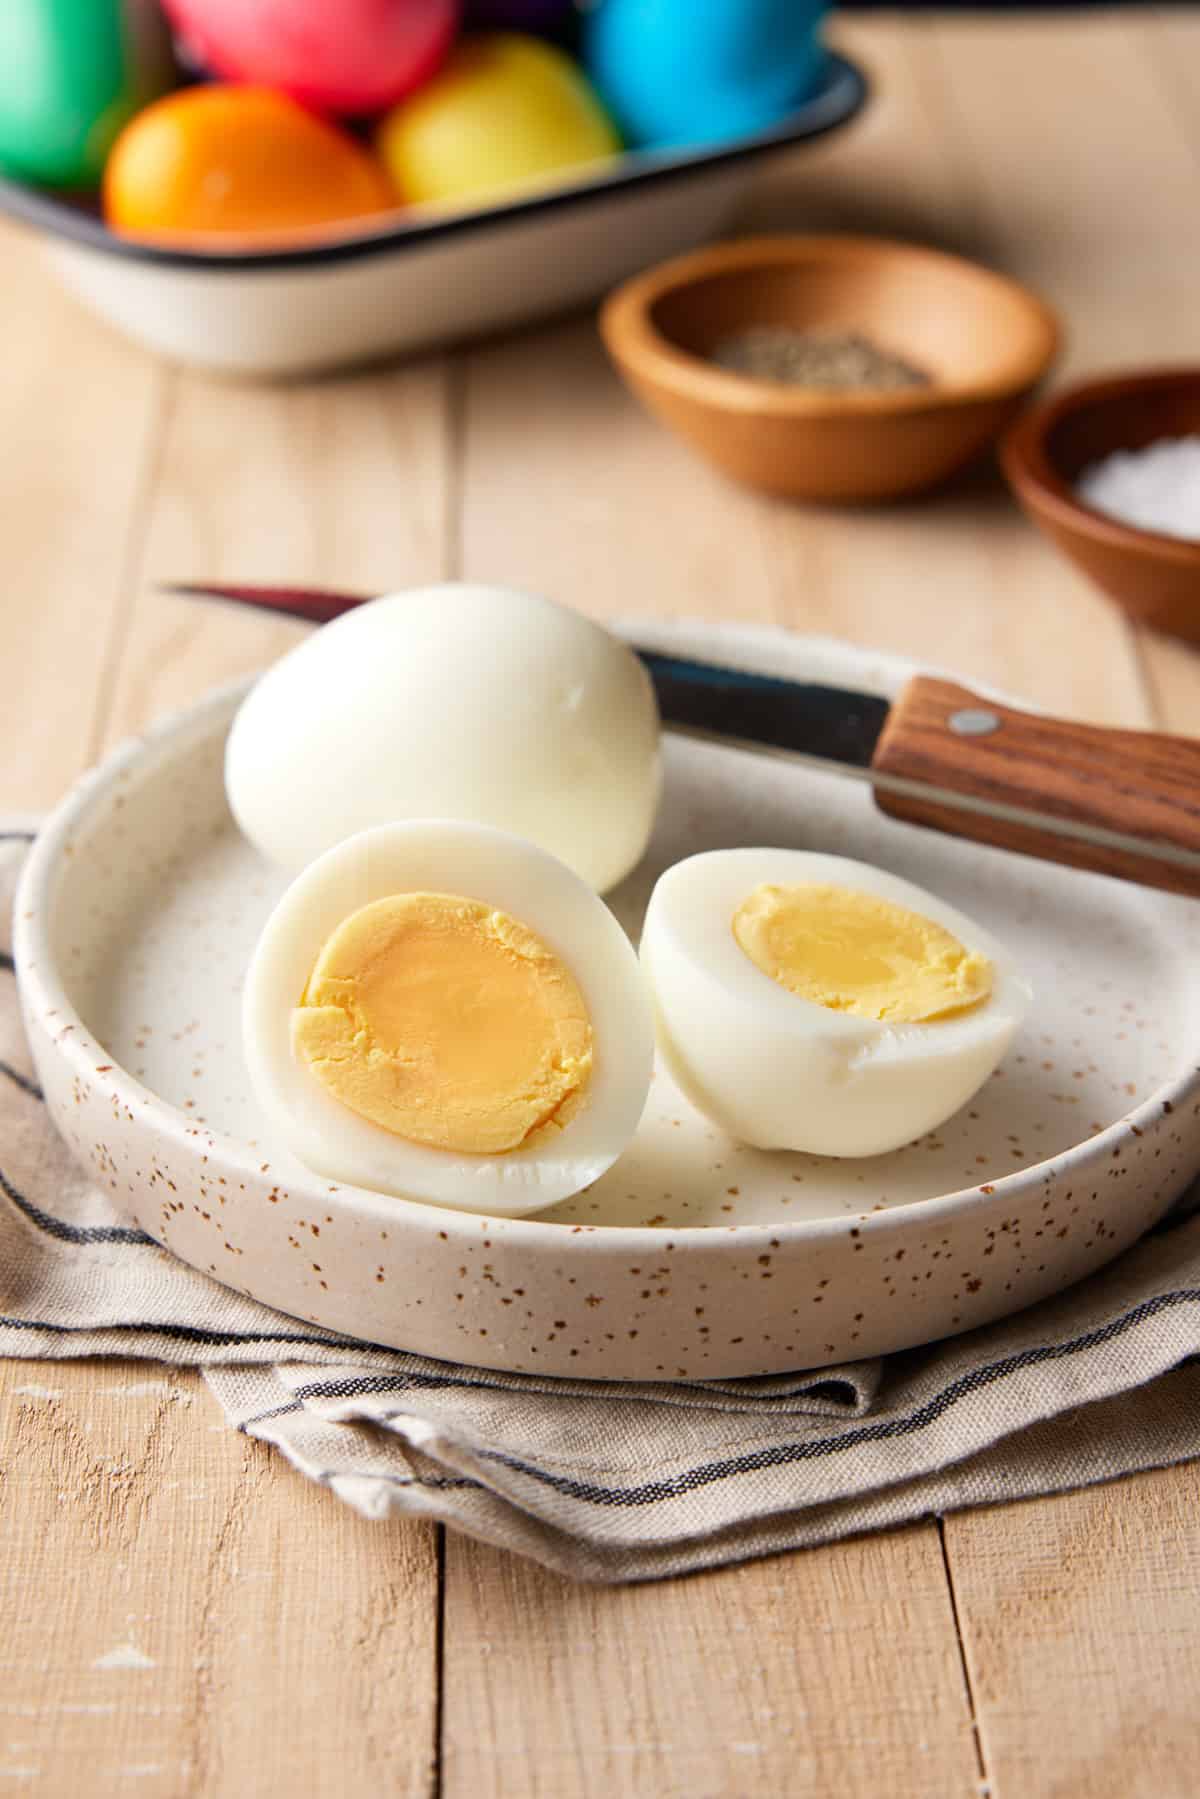 Sliced hard boiled egg on plate with knife and salt and pepper.